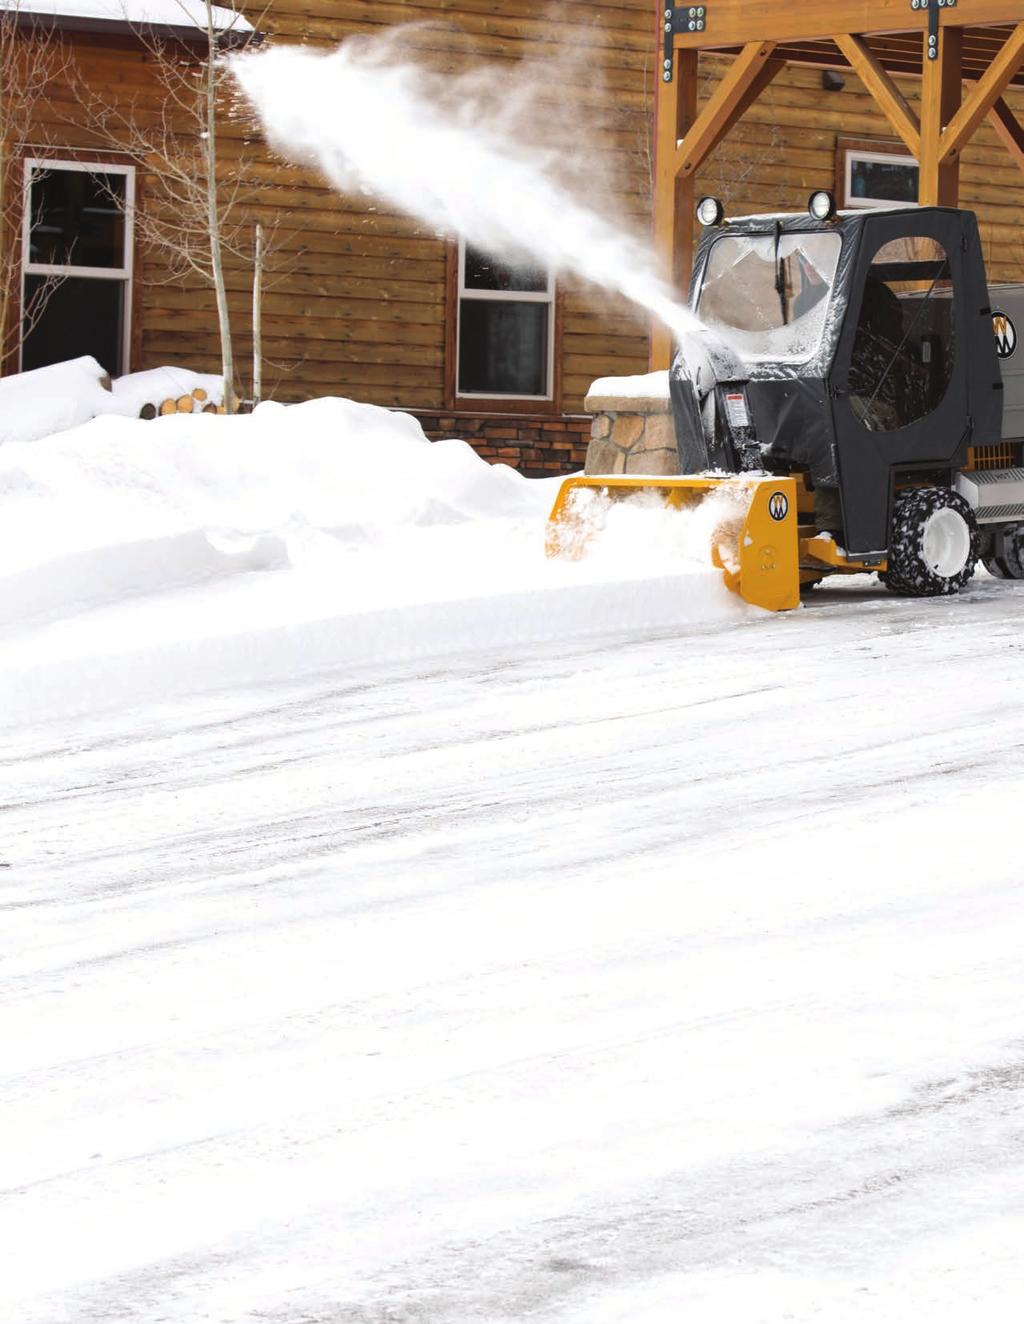 Two-Stage Snow Blower (42 or 50 ) Single-Stage Snow Blower A powerful add-on which throws snow up to 40 feet with a directional discharge spout that can be adjusted 180